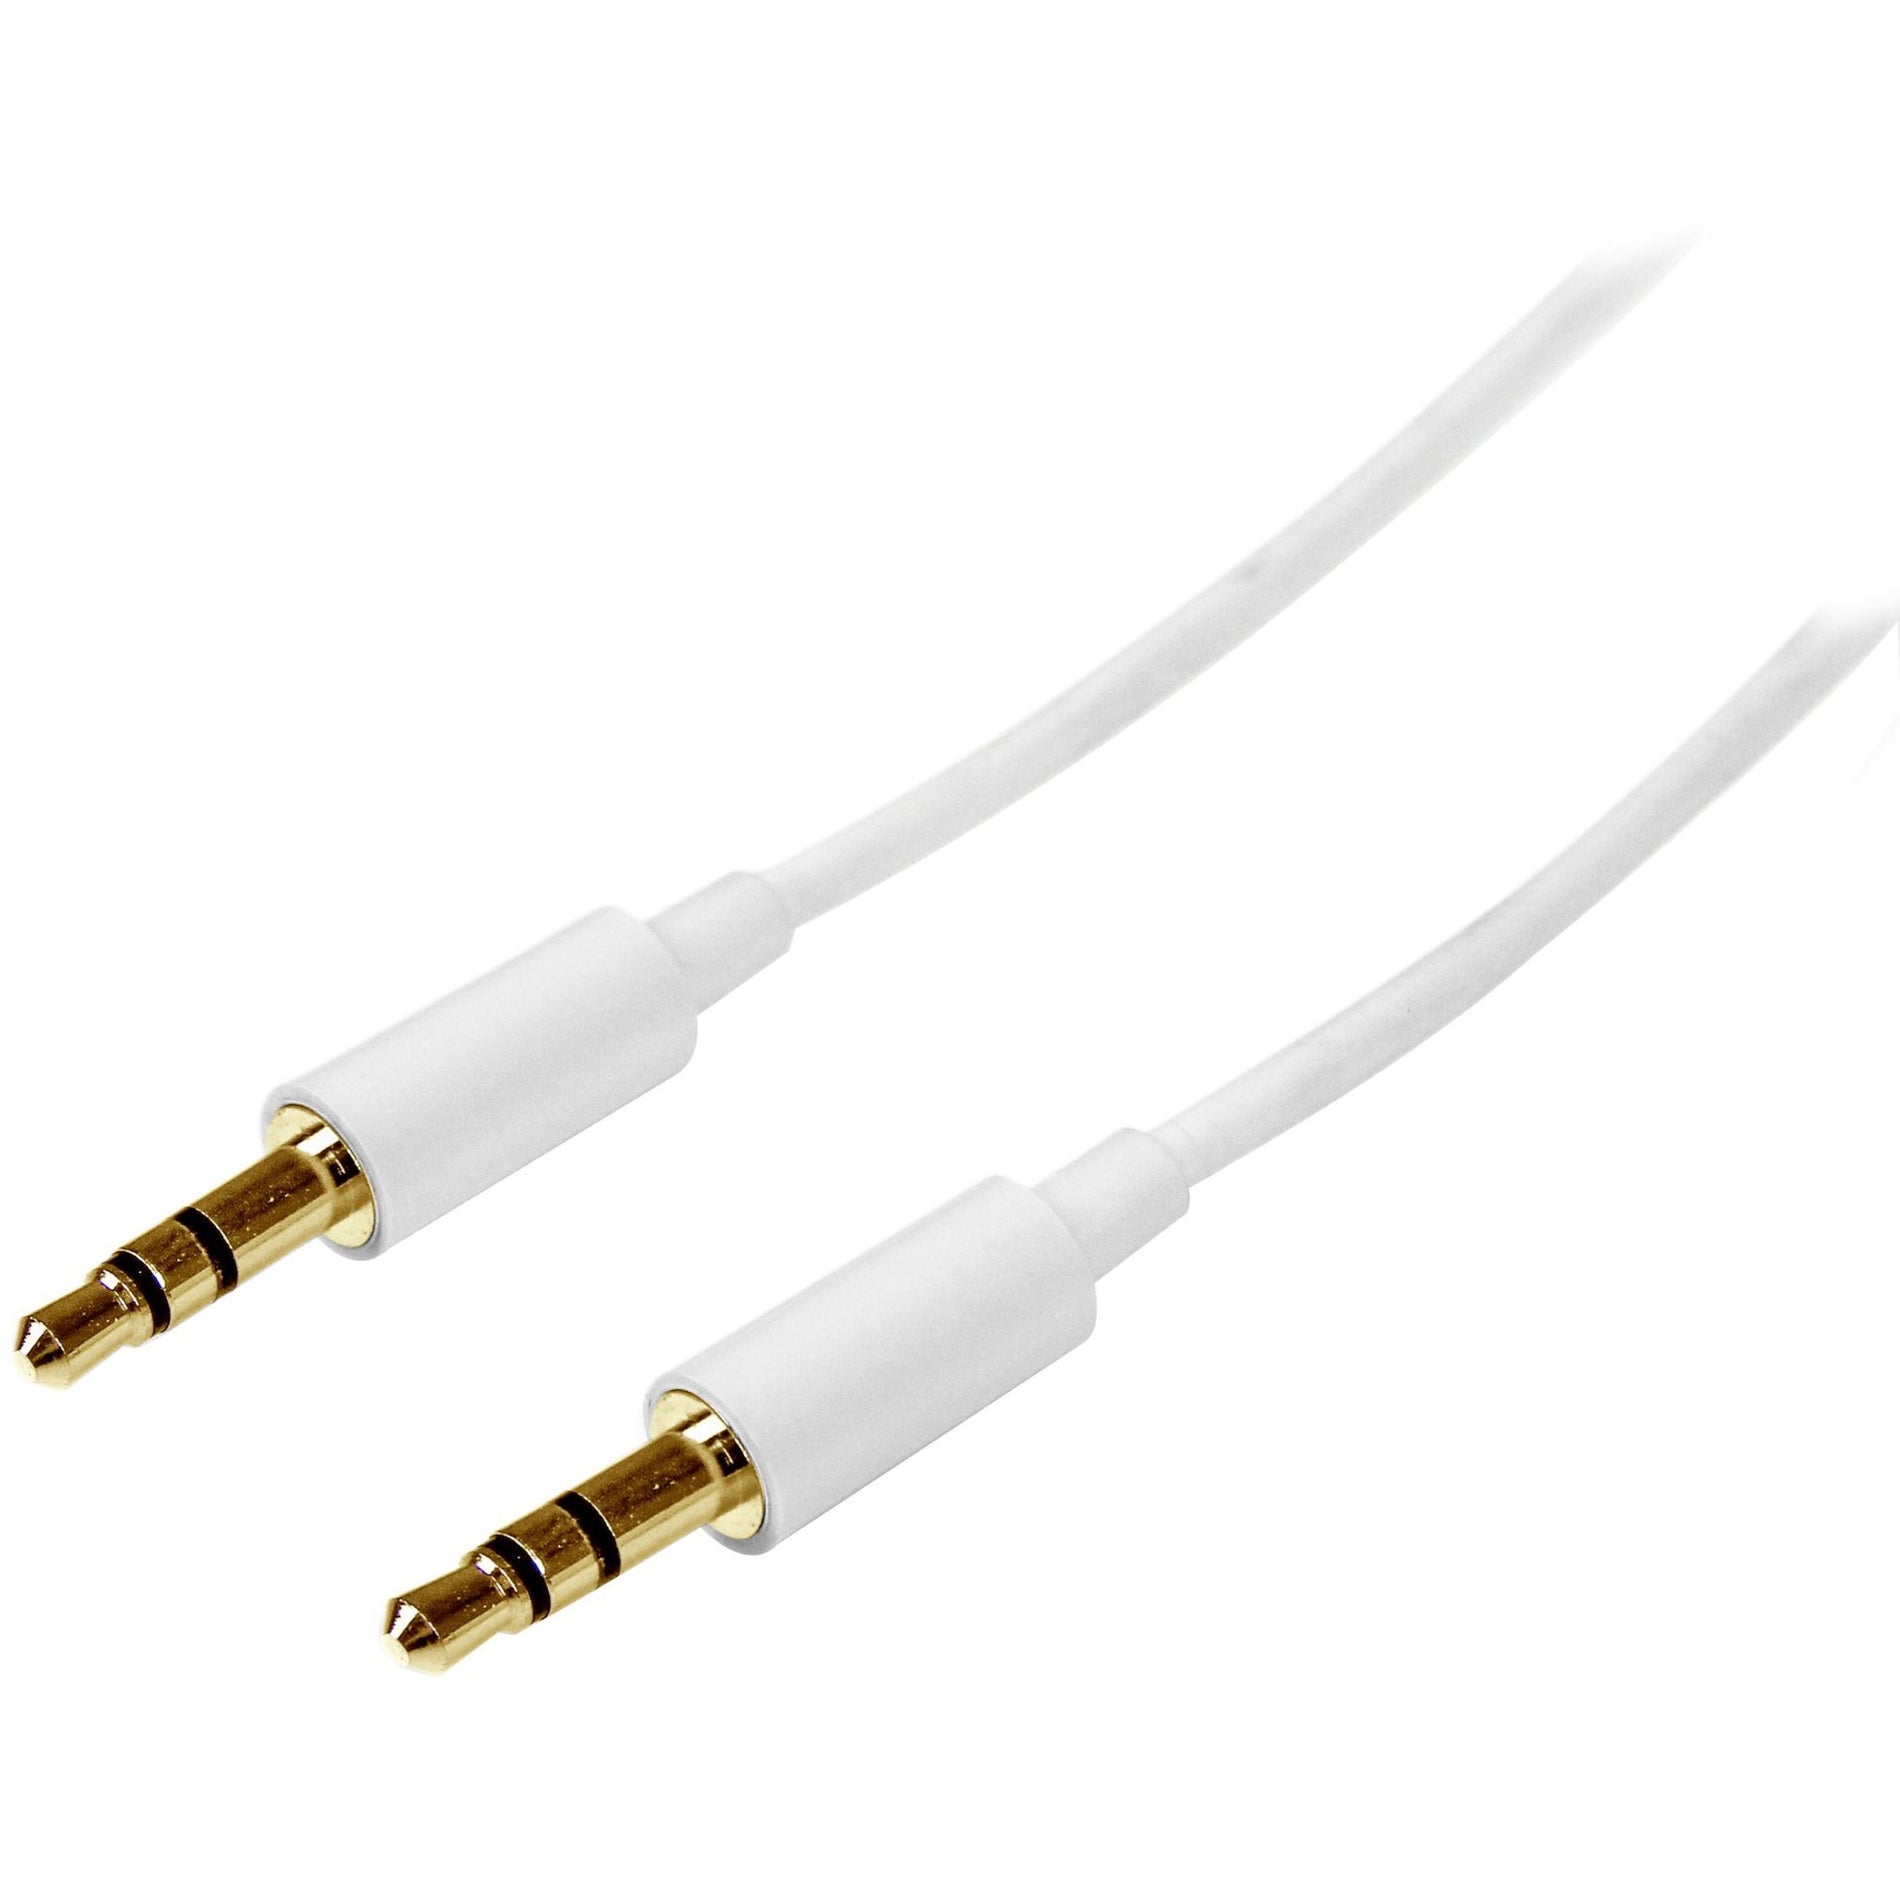 StarTech.com MU3MMMSWH 3m White Slim 3.5mm Stereo Audio Cable - Male to Male, Molded, Copper Conductor, 9.84 ft Length